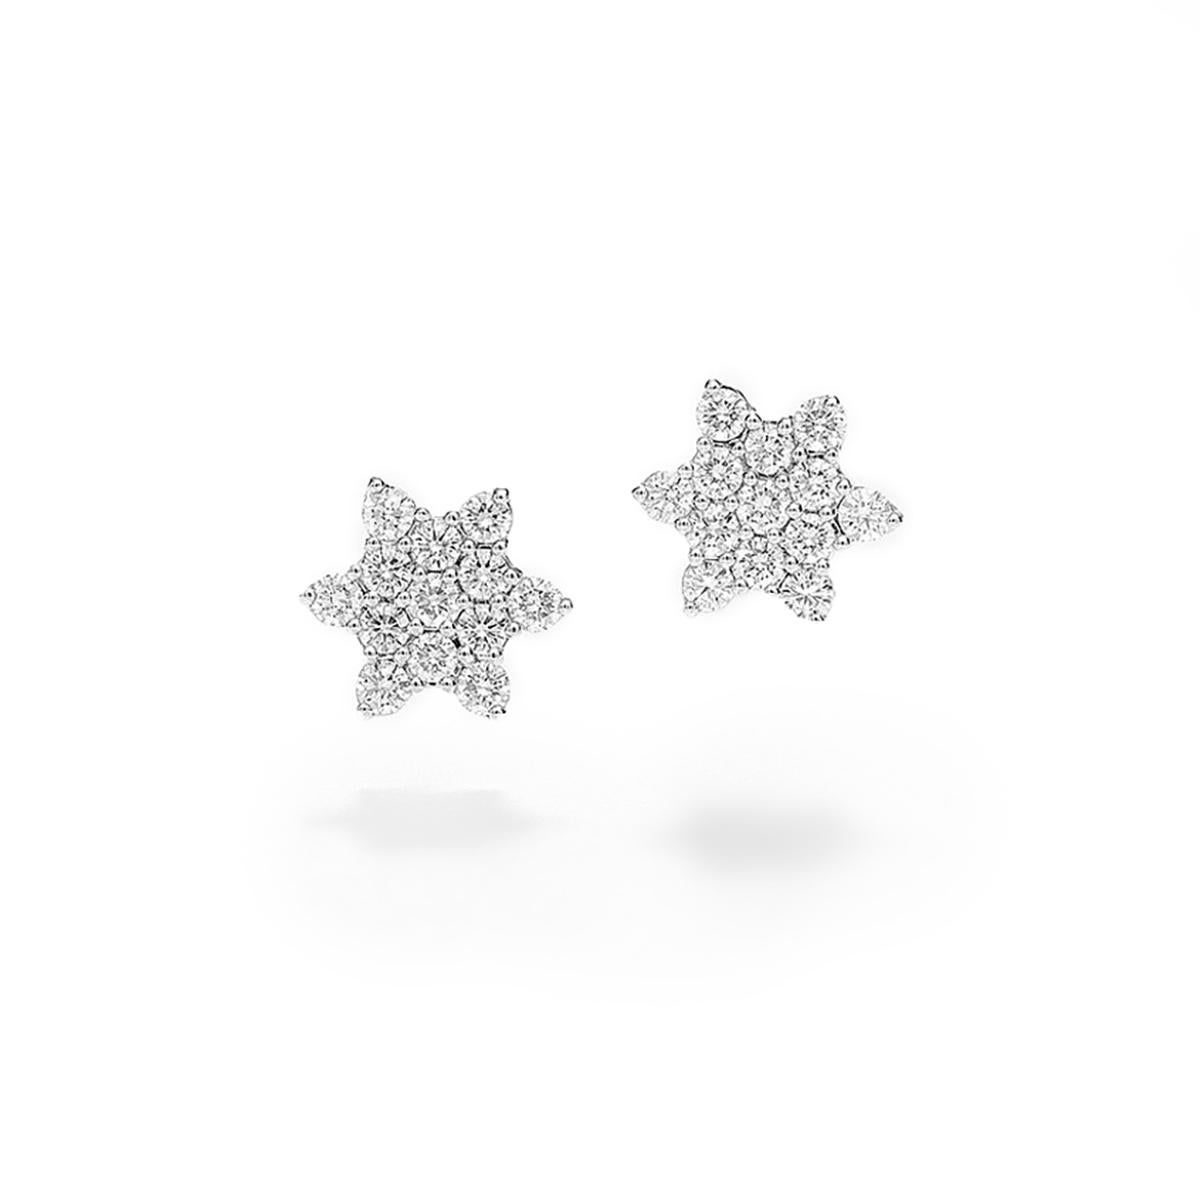 Star earrings in 18kt white gold set with diamonds 1.22 cts  